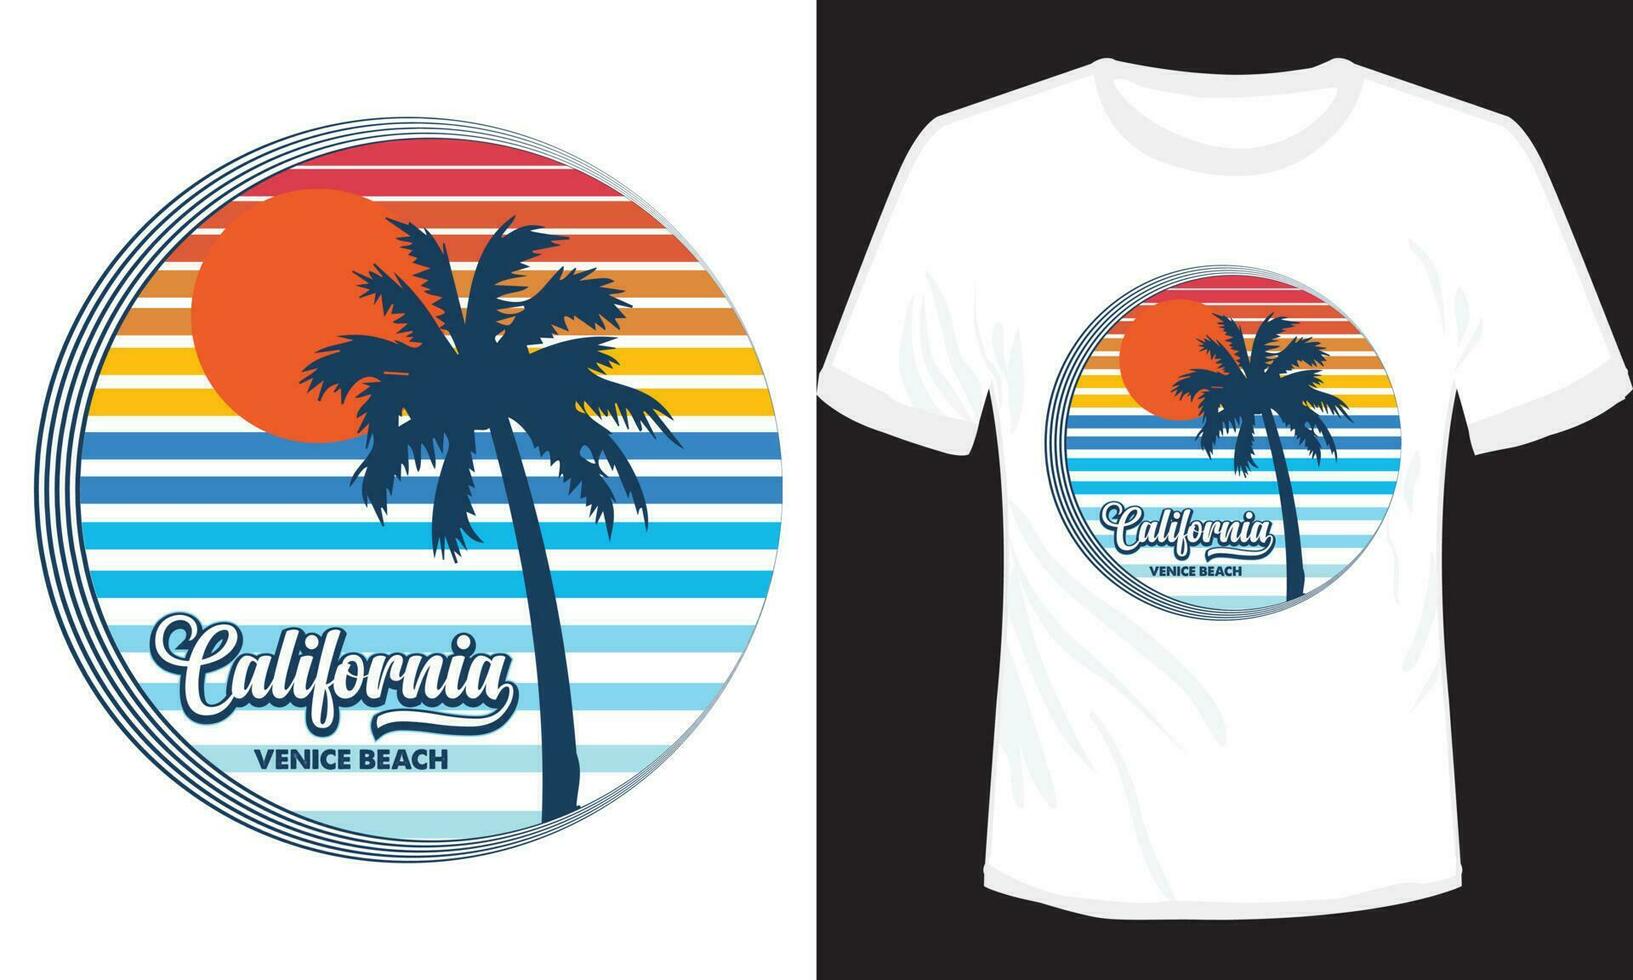 California Beach Surfing with palm trees vector vintage t-shirt illustration design, California Venice beach surfing t-shirt design